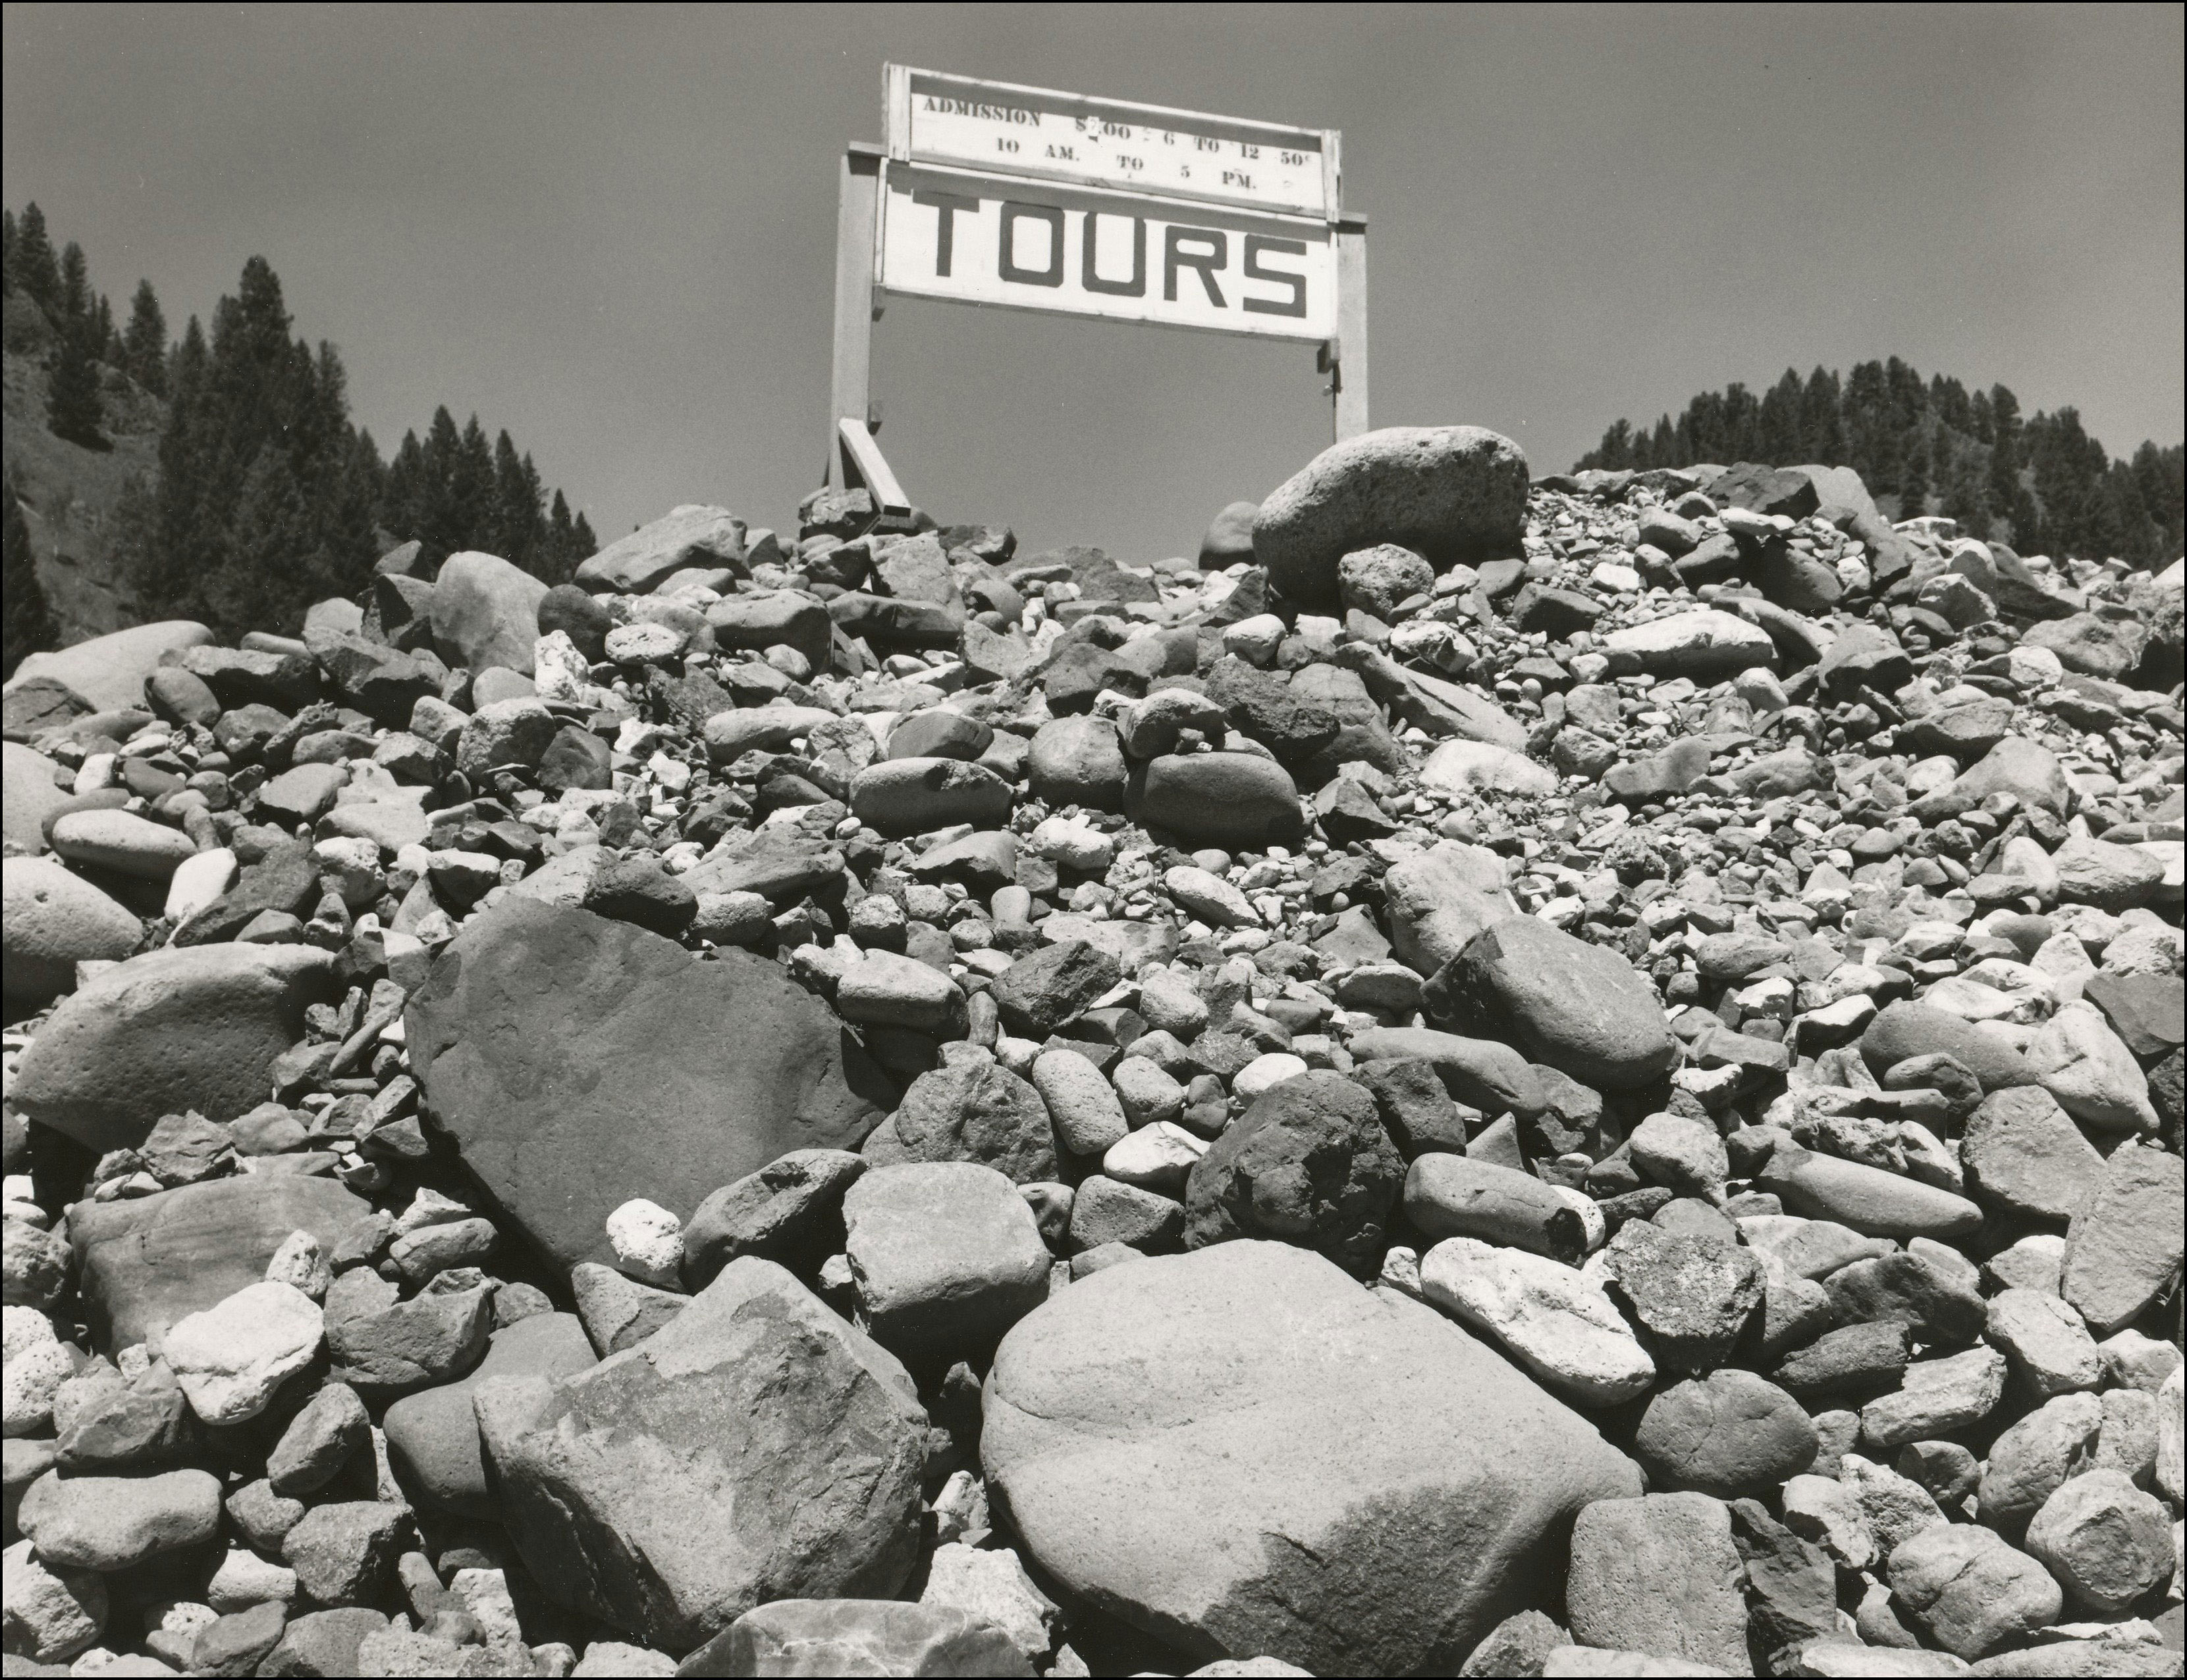 Looking up at a sign that says TOURS with times above. The sign is on a large pile of rocks of all sizes.